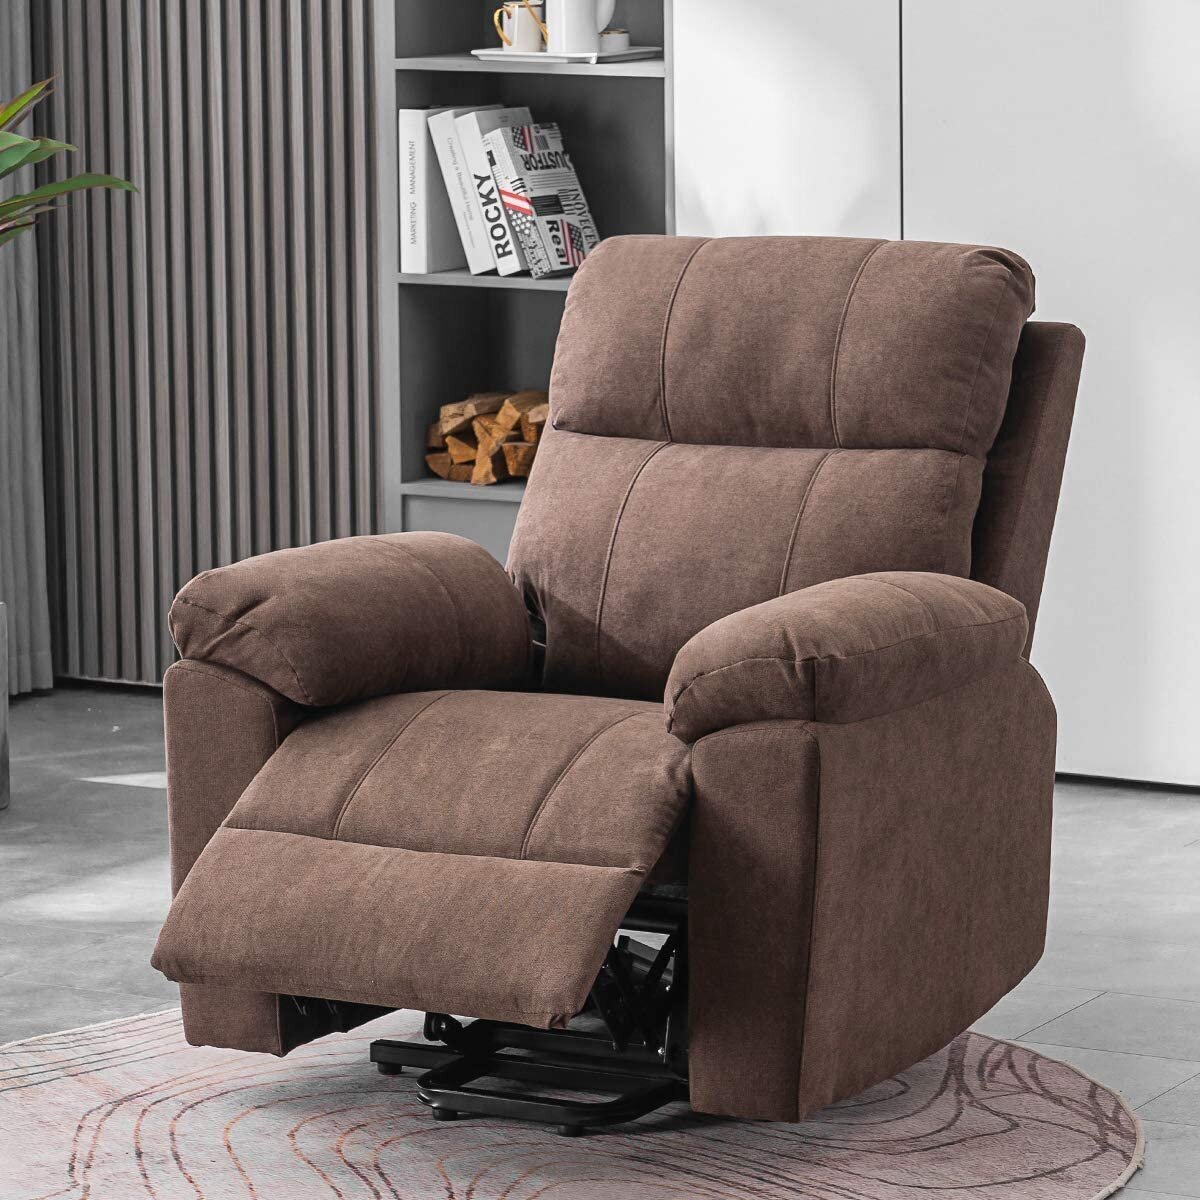 Medical Recliner Chair for Home - Ideas on Foter